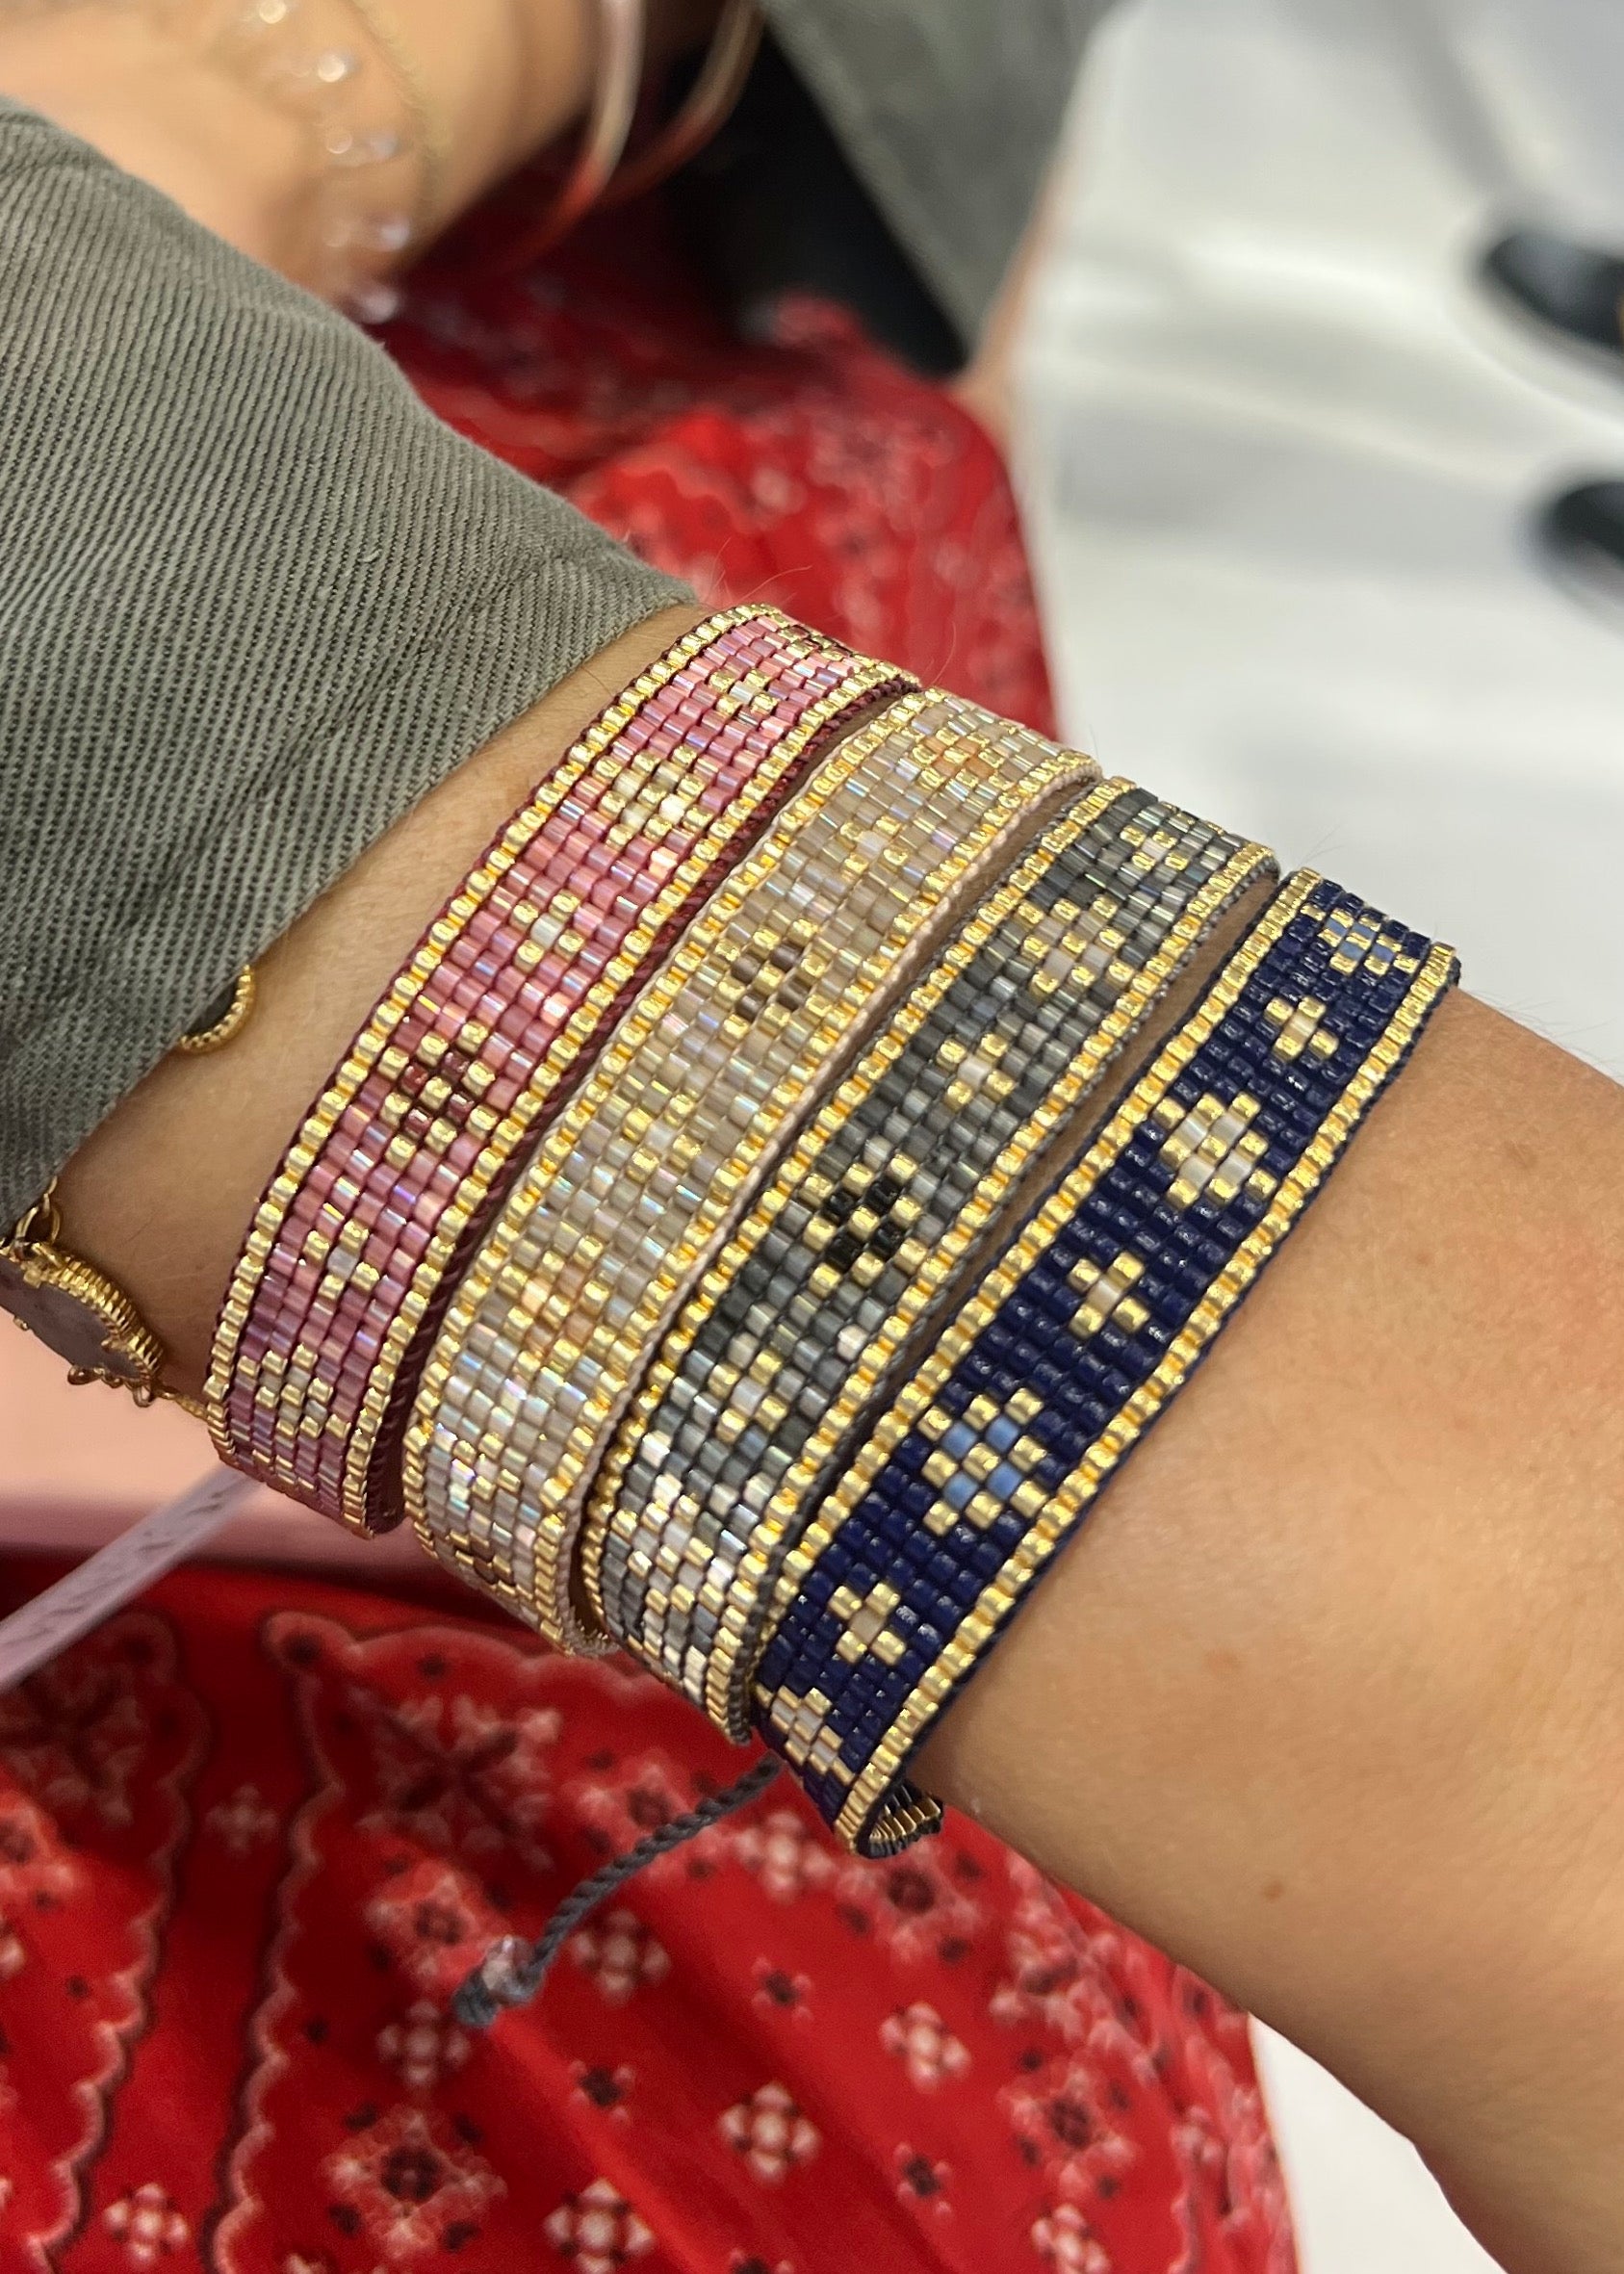 The Embroidered Bracelets